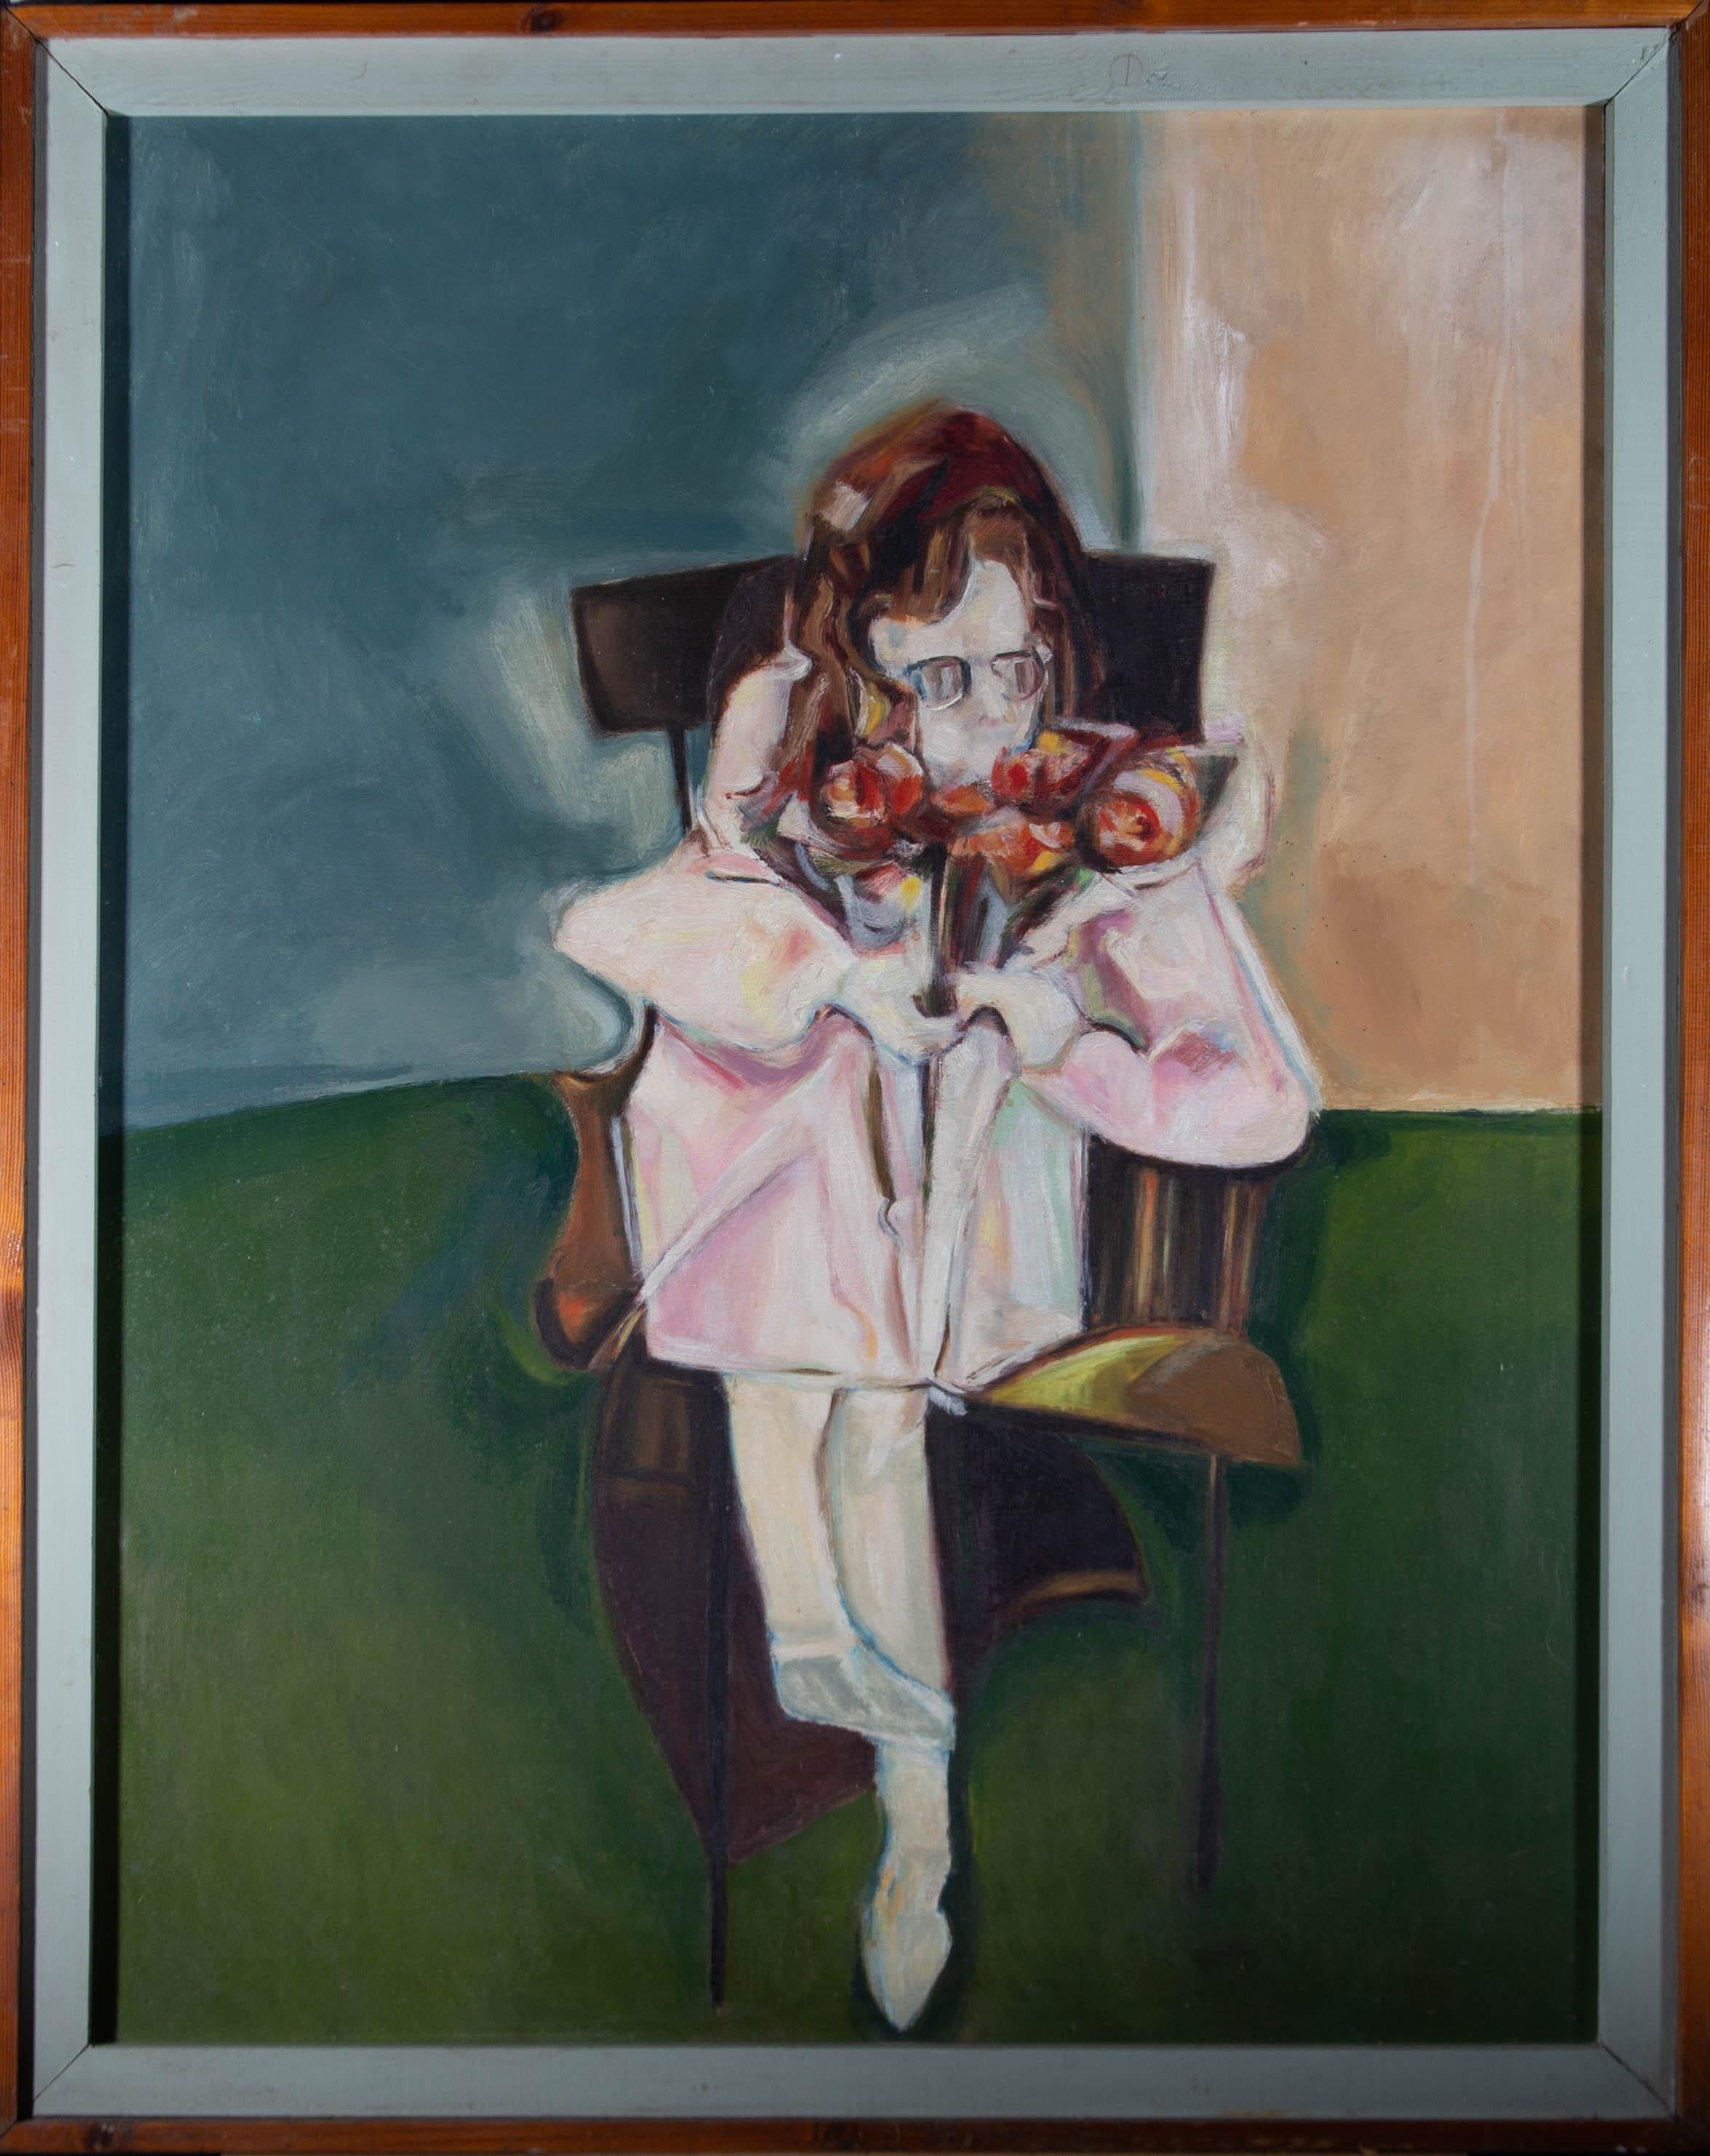 An eye catching contemporary oil on board showing a semi abstracted scene of a child holding a bunch of flowers, sitting on a chair in a green room. The artist takes clear inspiration from Francis Bacon and adds his own, more cheerful subject